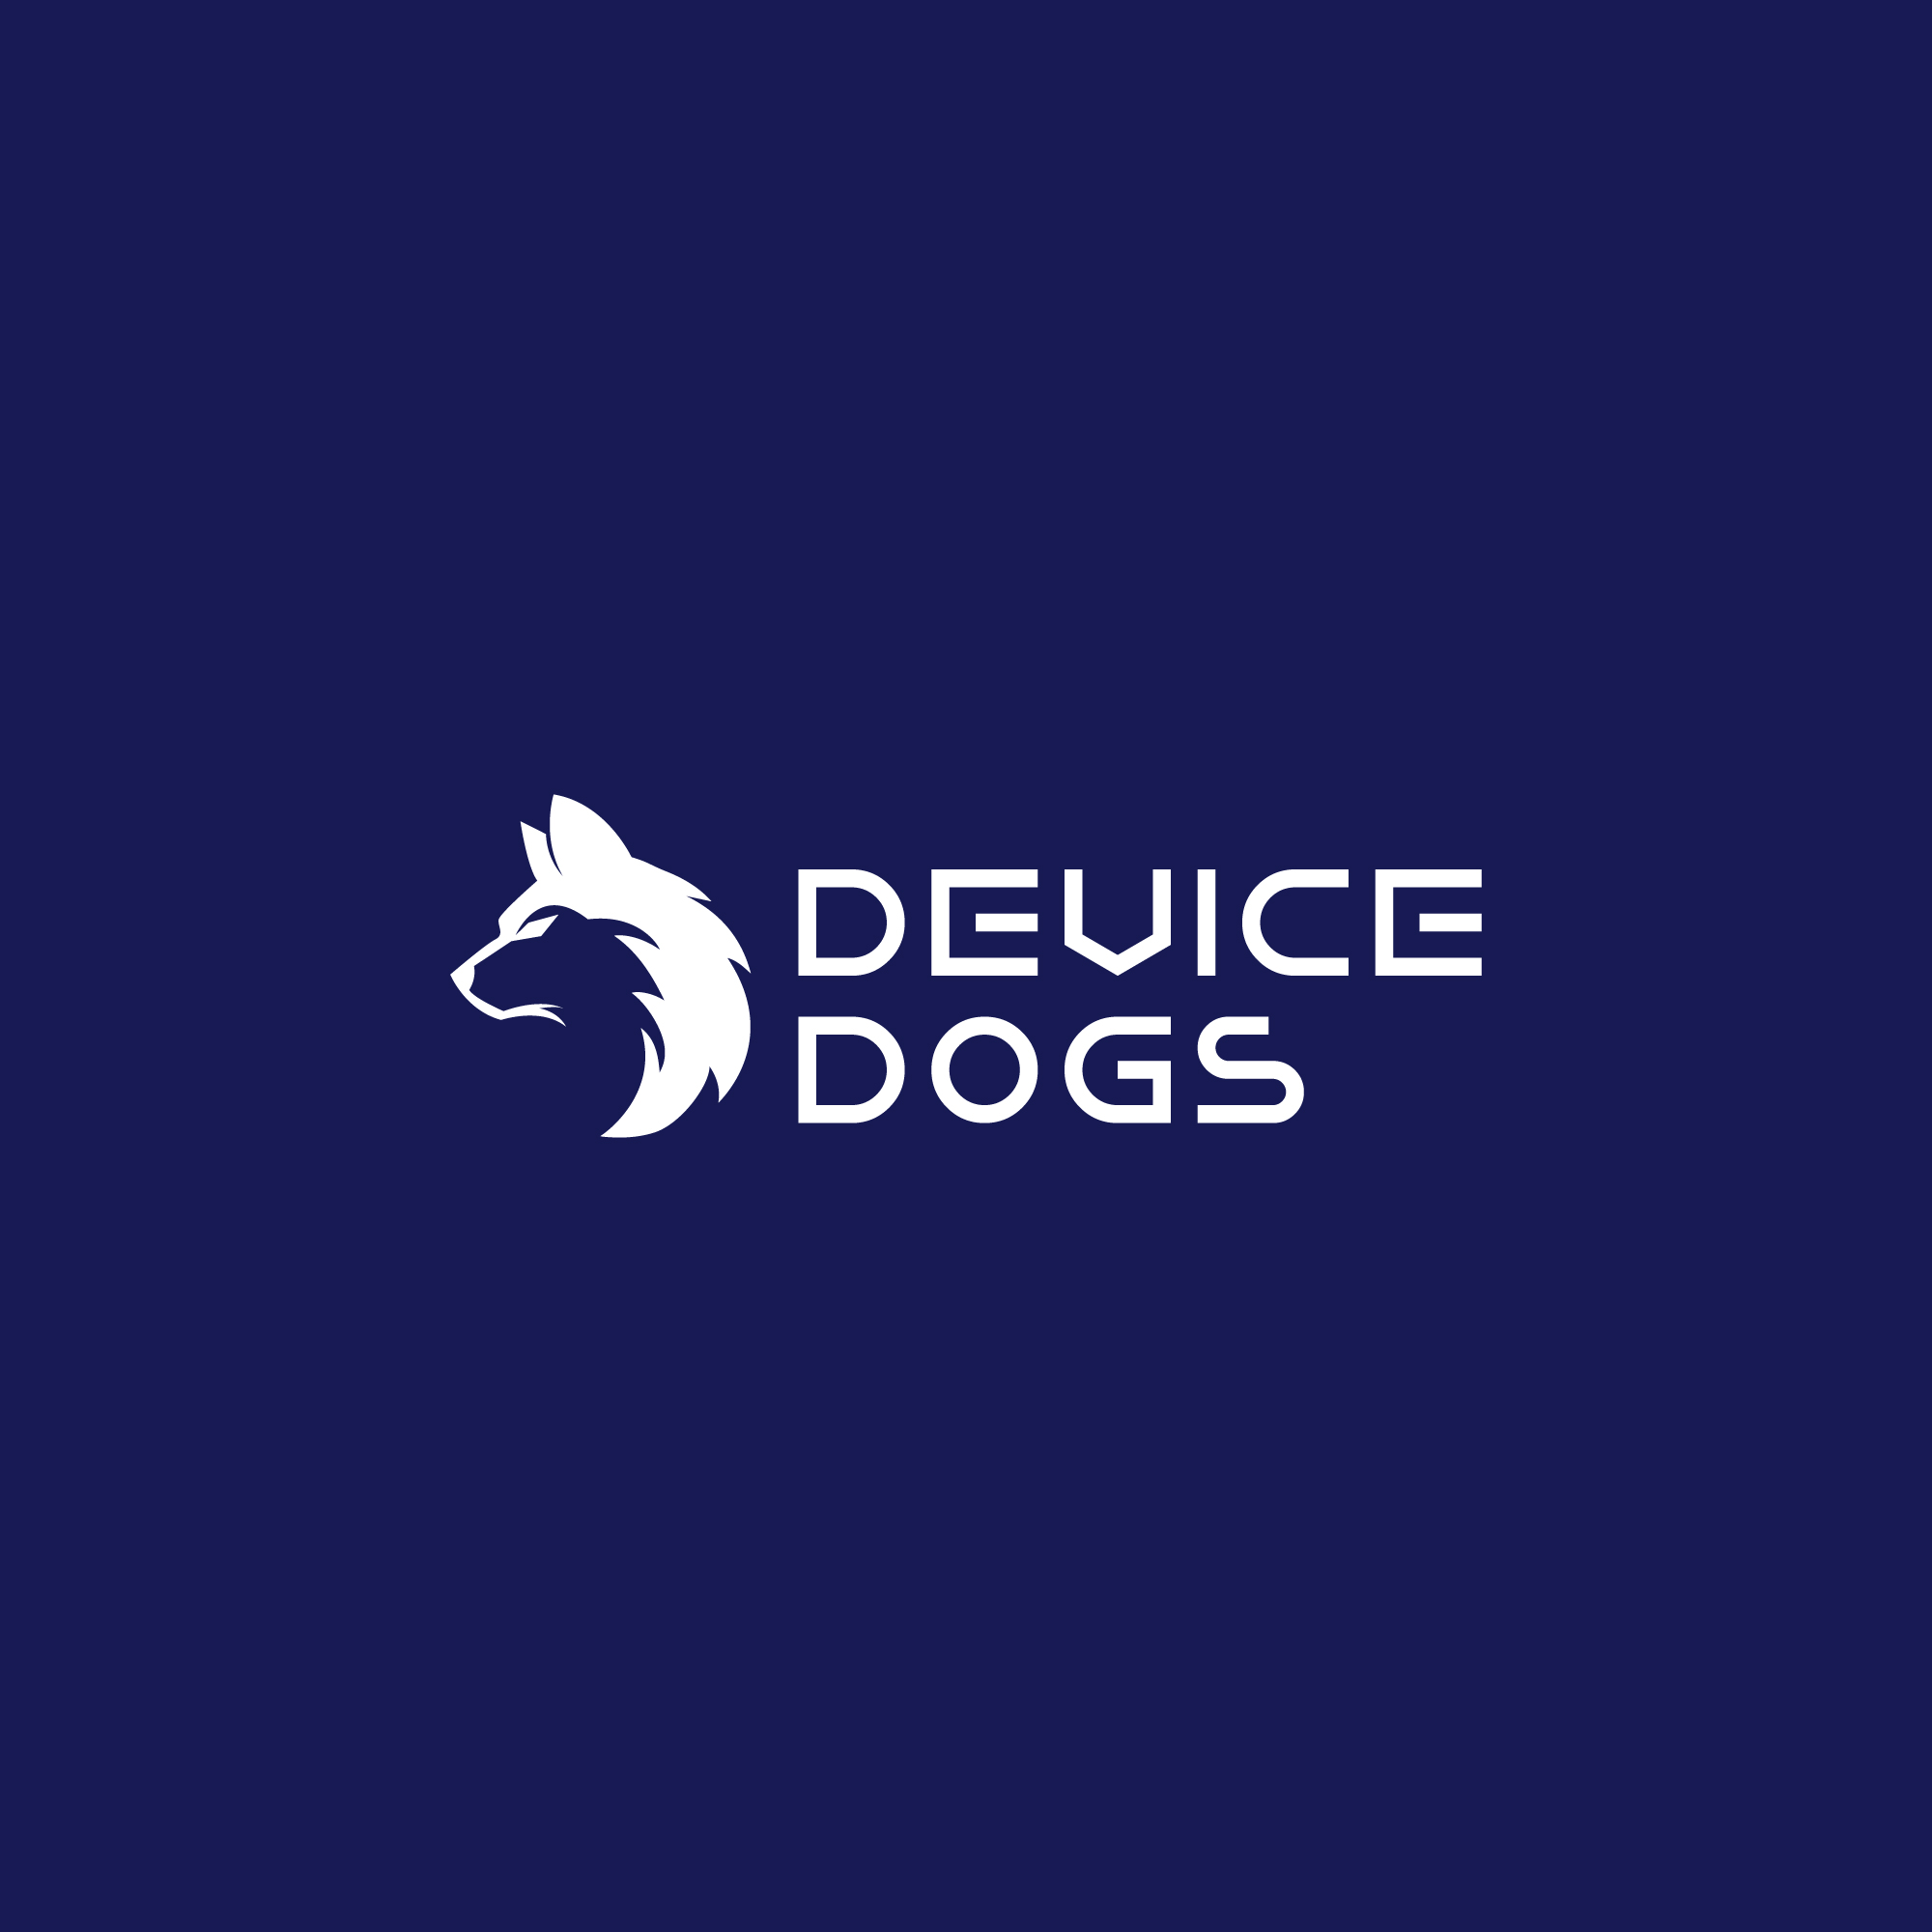 Device Dogs Handles Device Procurement, Delivery, and Returns for Employees Making Remote Work Setup a Breeze for Organizations